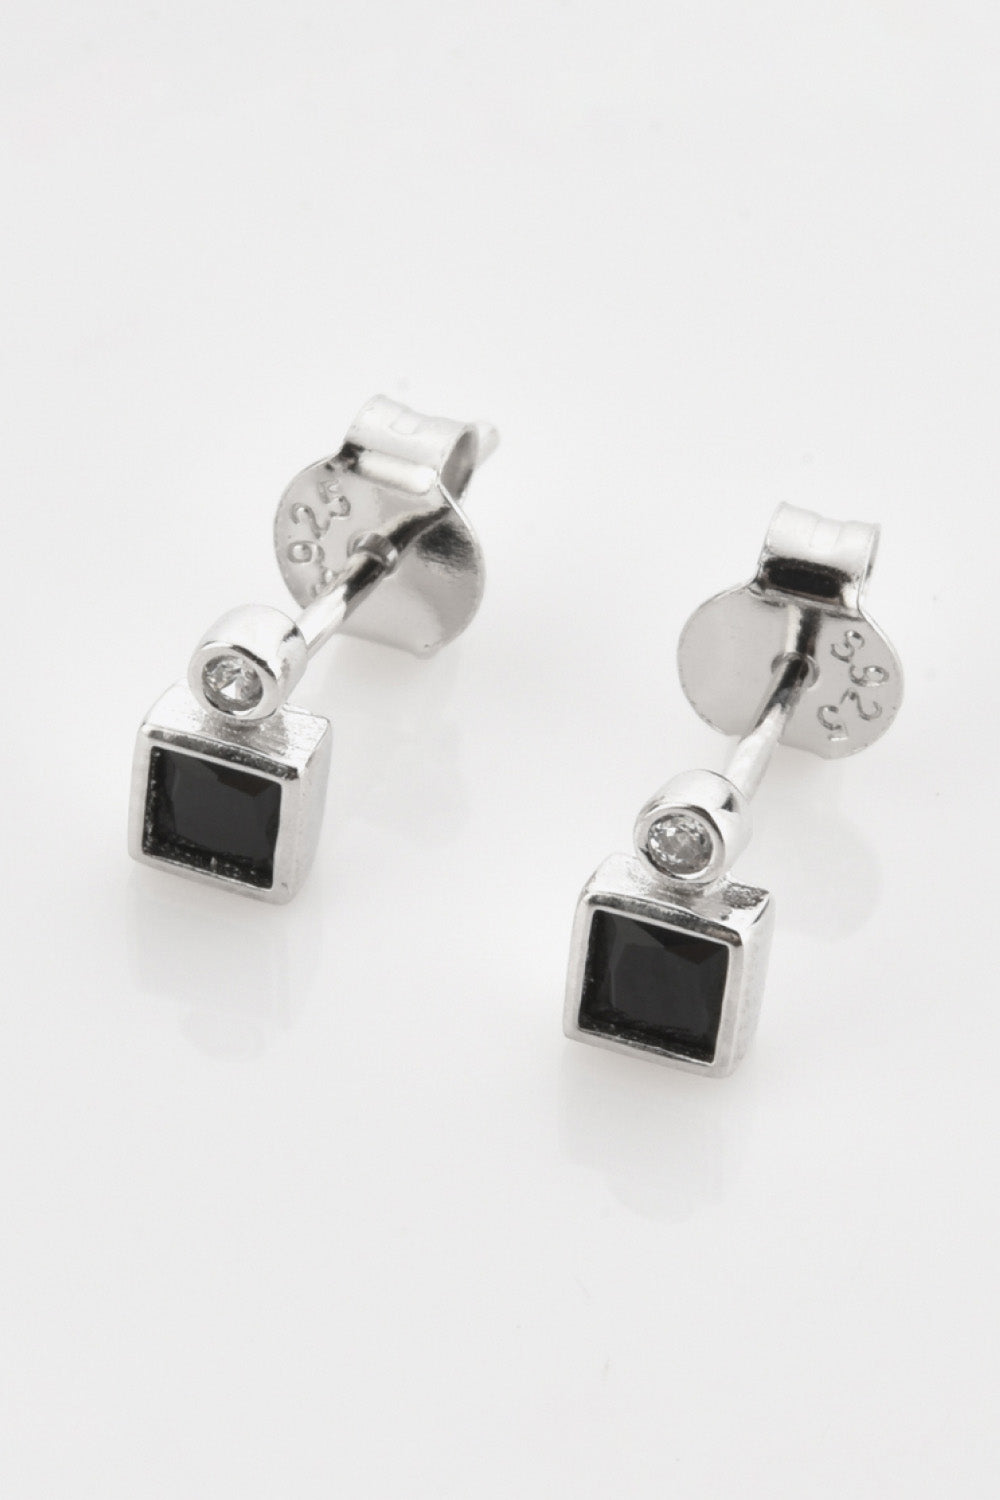 Inlaid Zircon Square 925 Sterling Silver Earrings - Earrings - FITGGINS